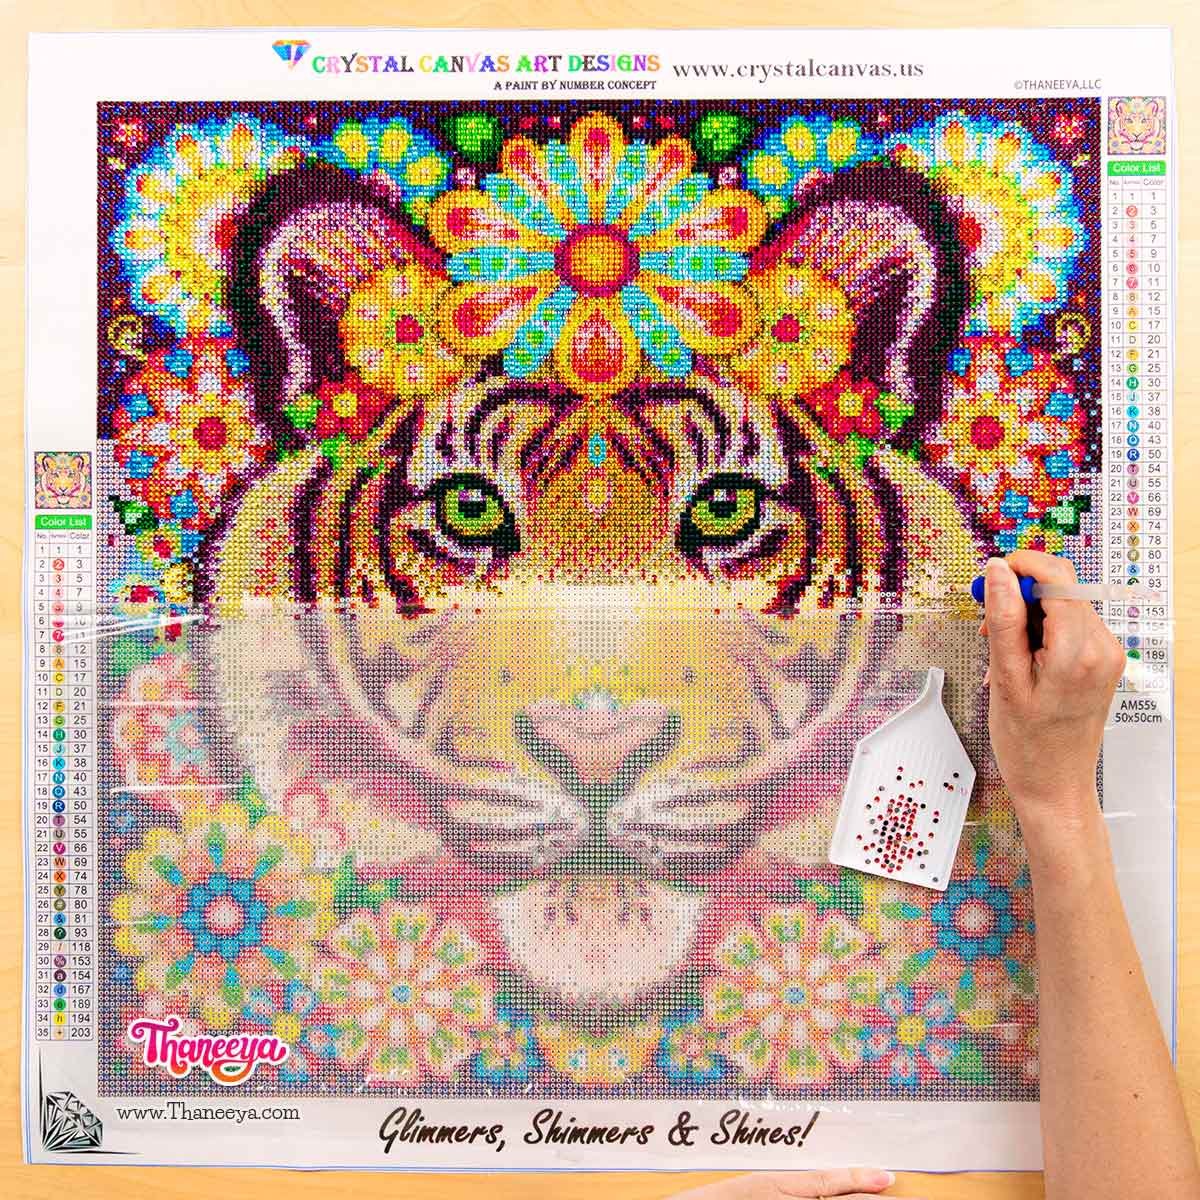 Thaneeya McArdle Diamond Painting Kits - Officially Licensed by